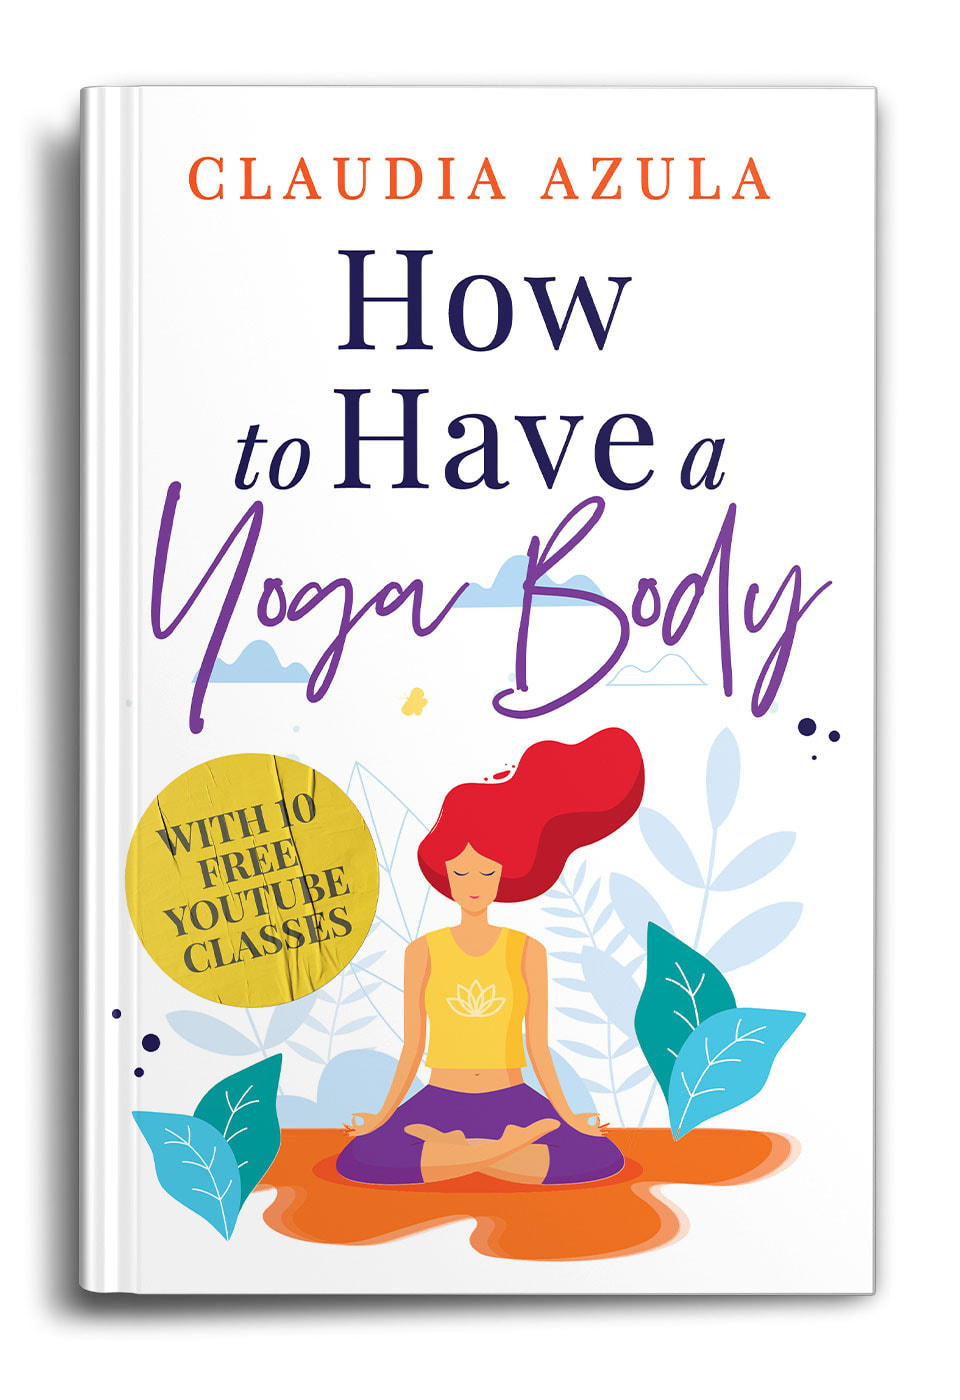 How-to-Have-a-Yoga-Body-by-Claudia-Azula